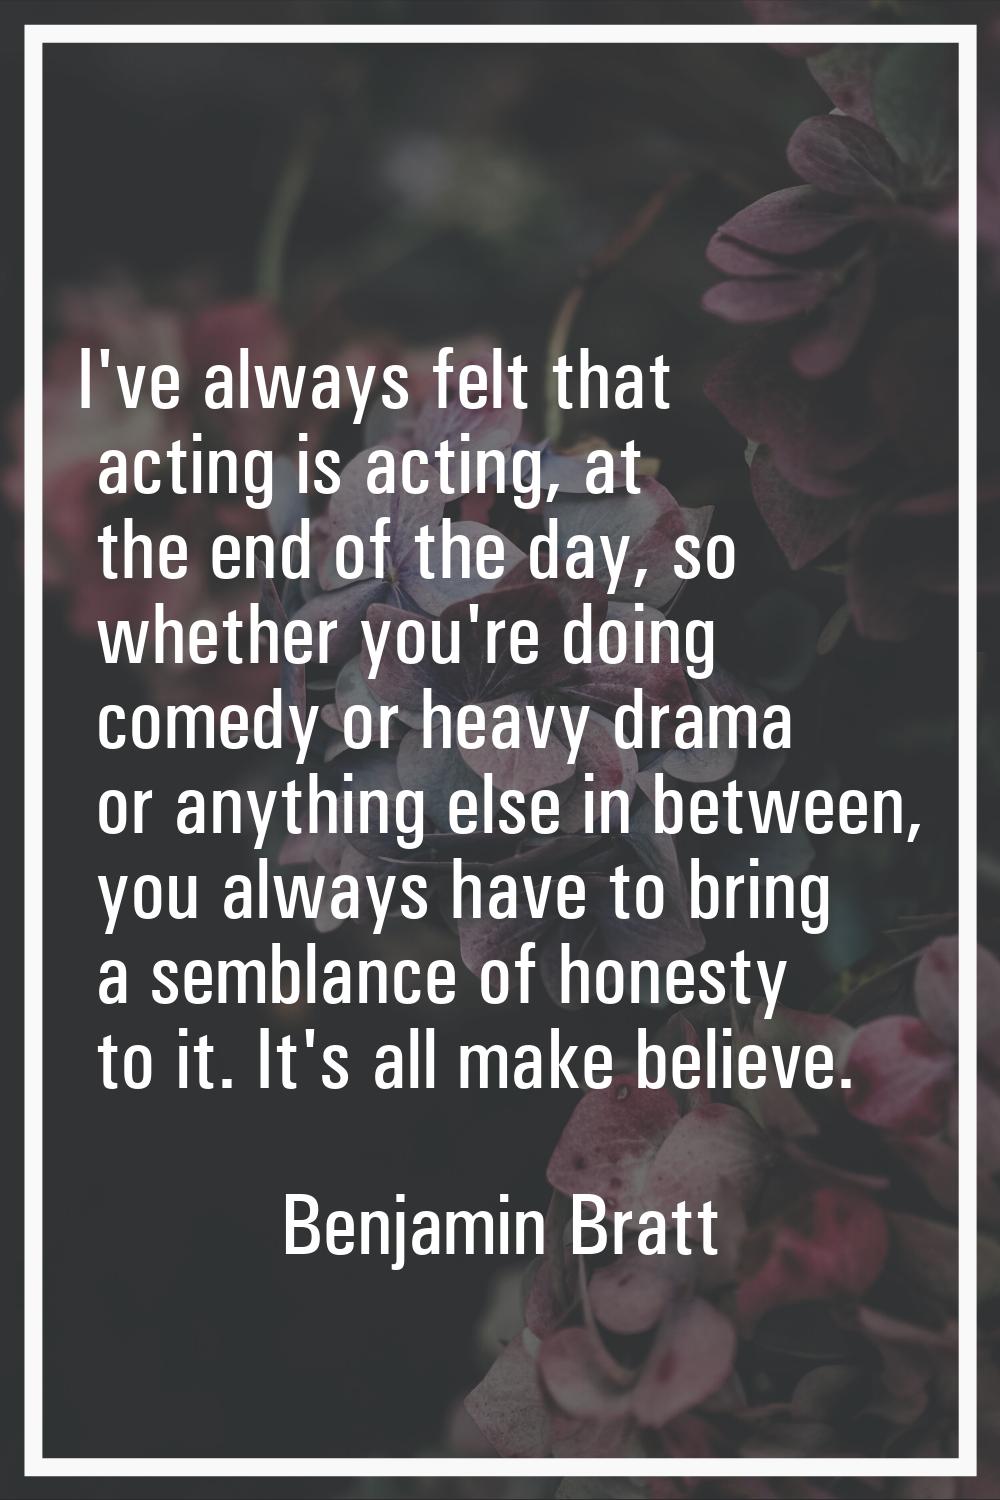 I've always felt that acting is acting, at the end of the day, so whether you're doing comedy or he